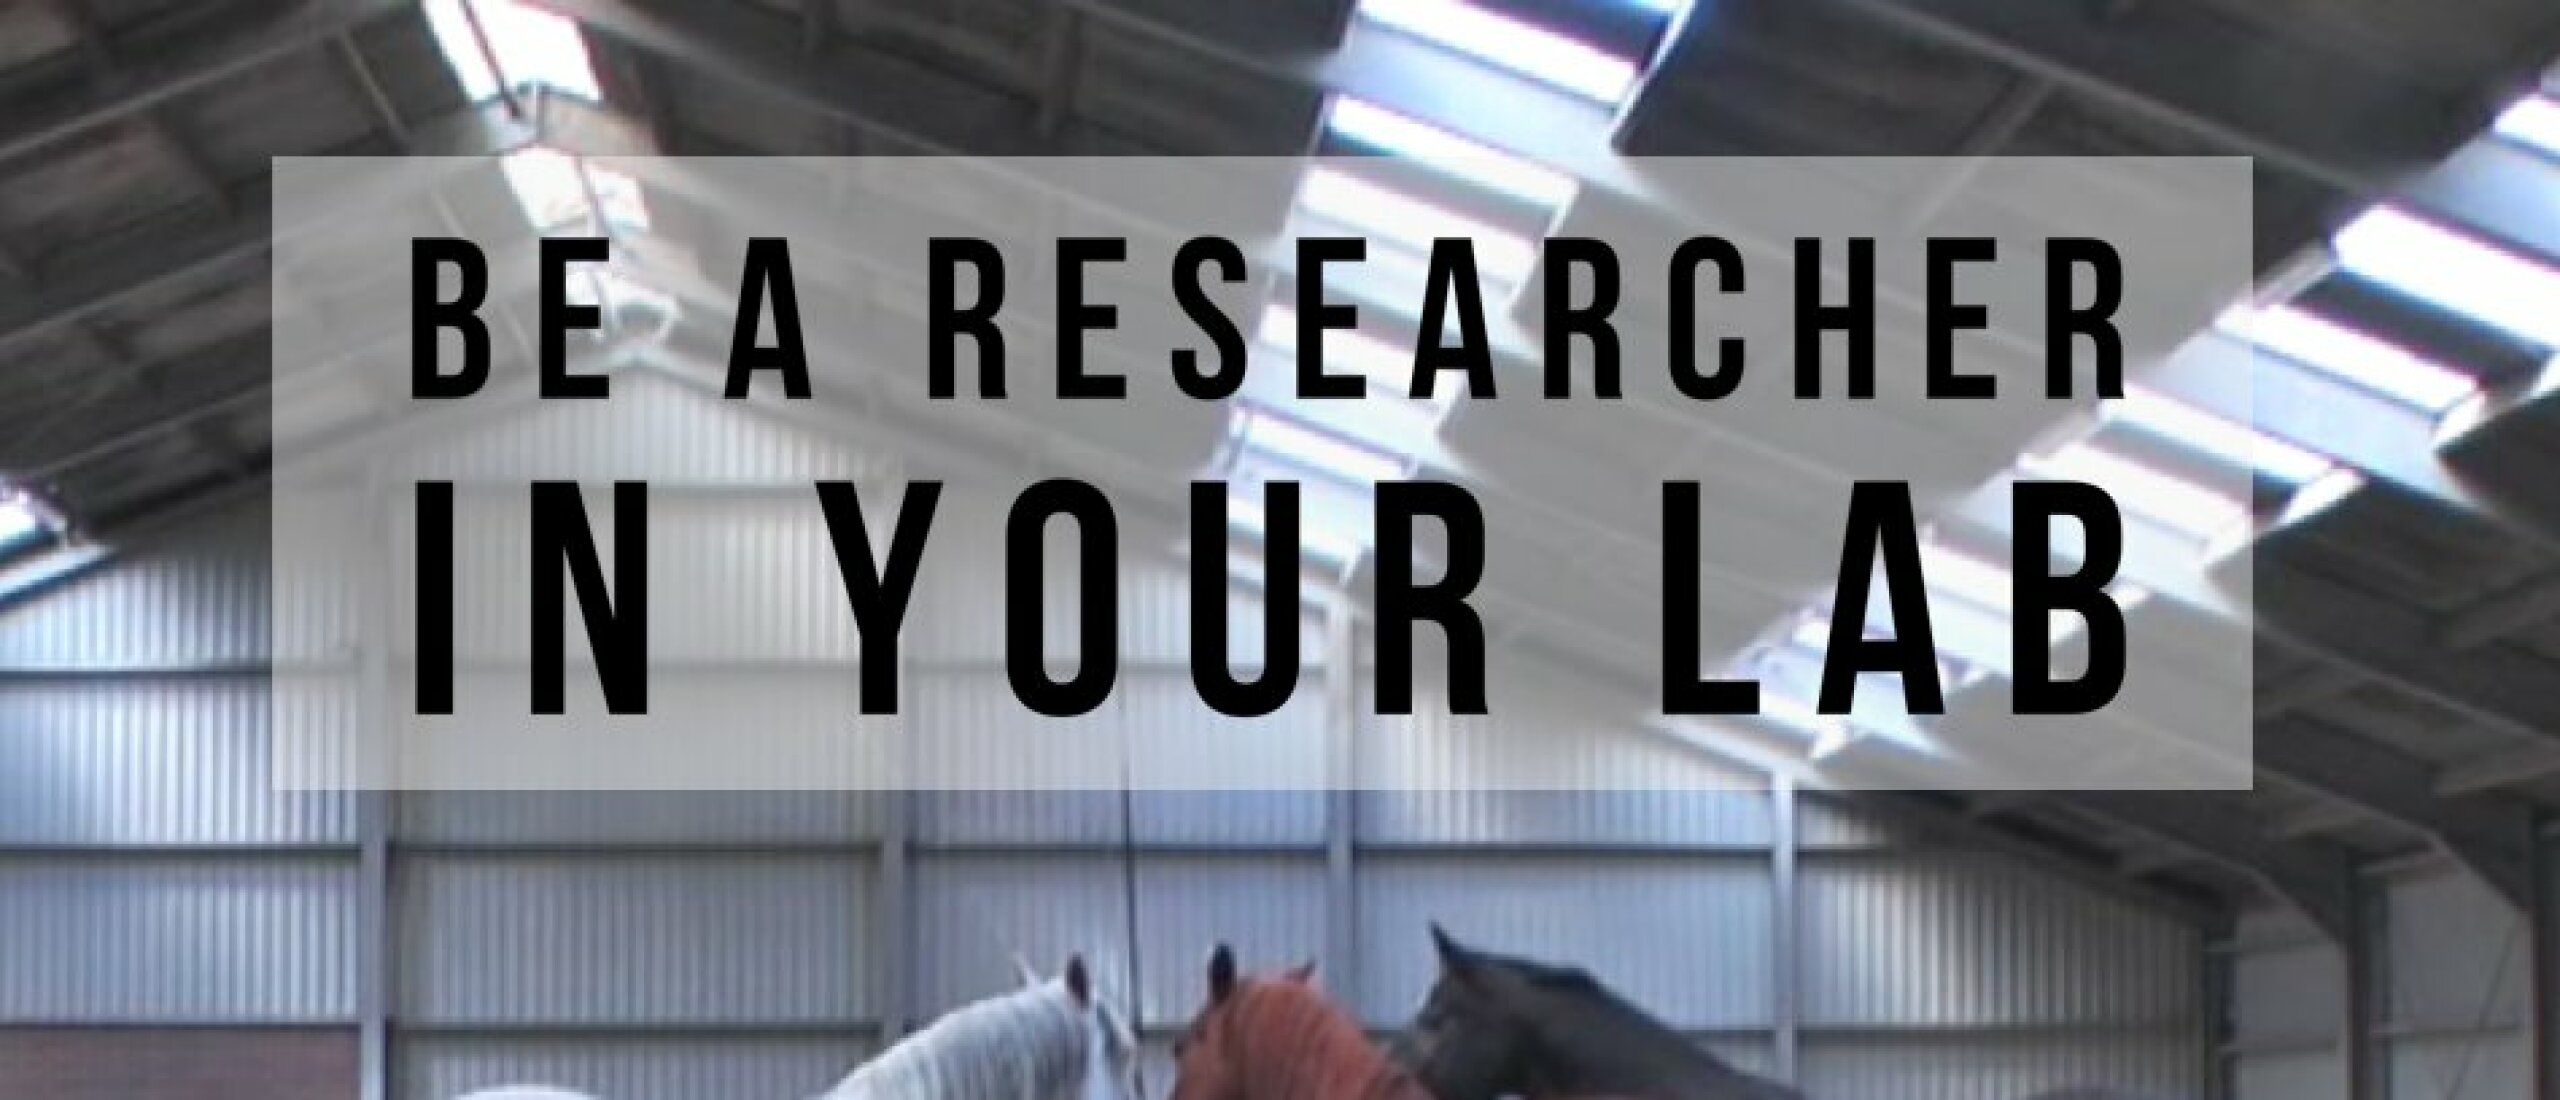 Be a researcher in your lab